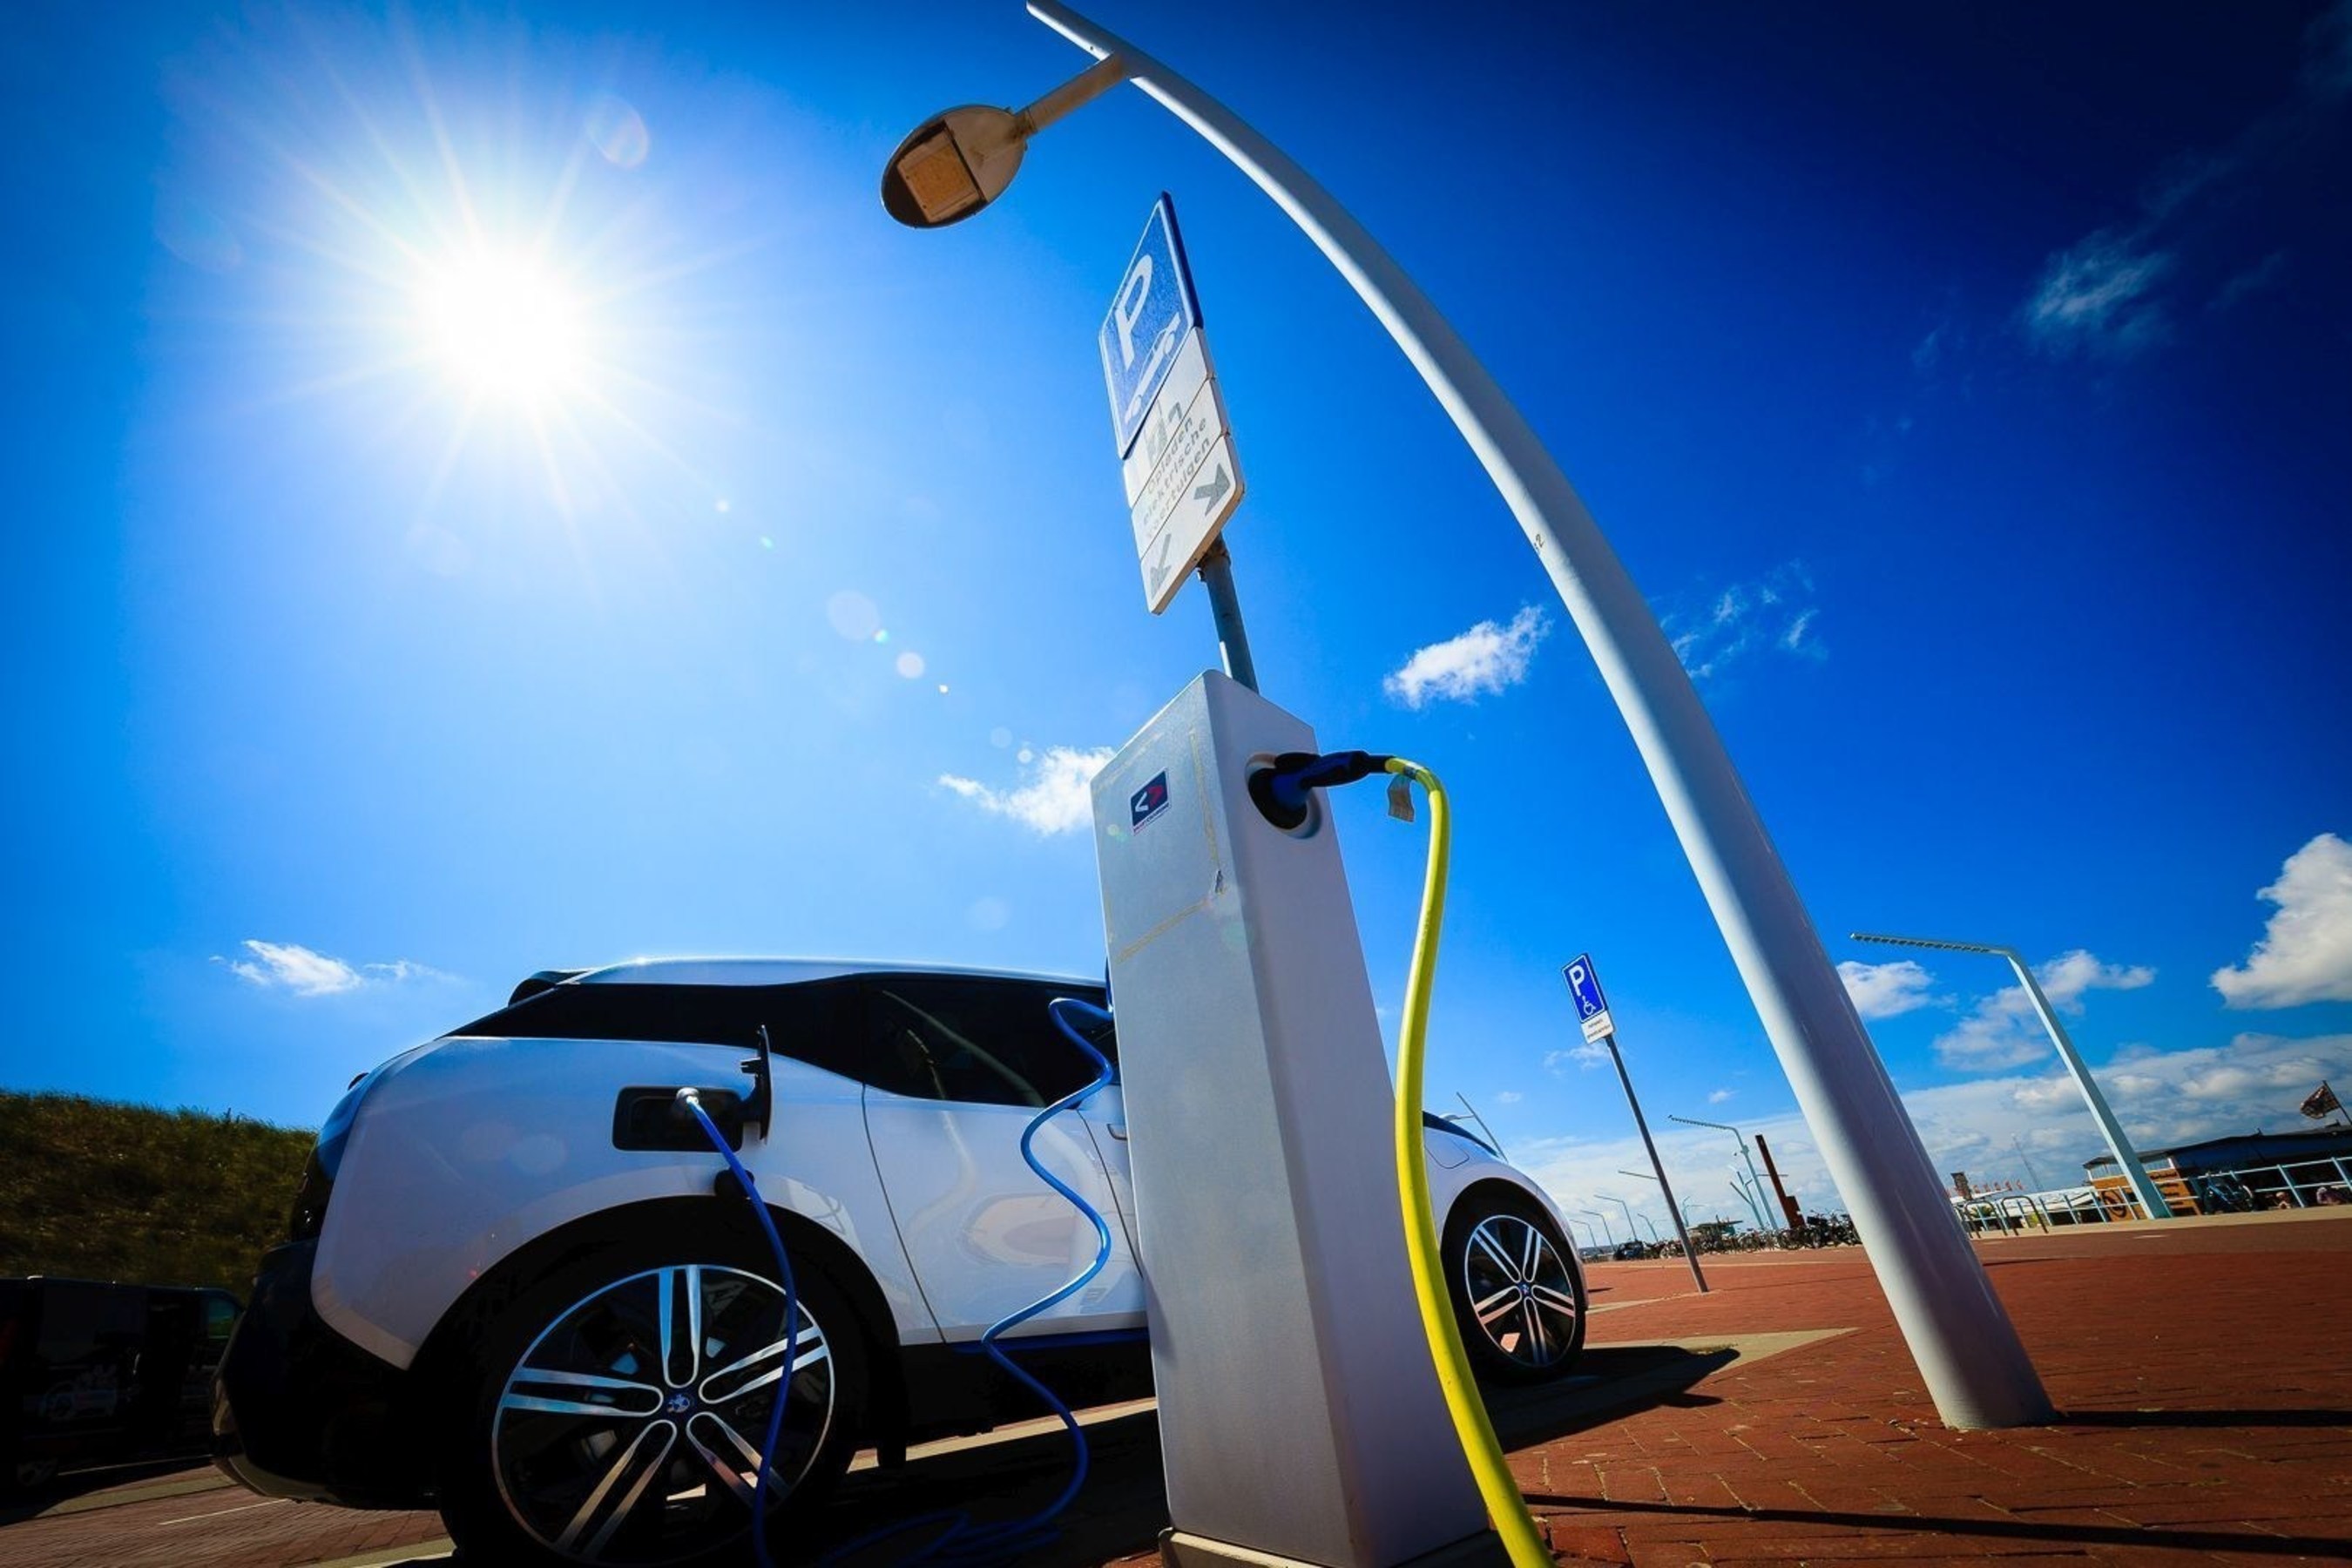 A full electric vehicle charging at a Smart Charging station in the city of The Hague (PRNewsFoto/Living Lab Smart Charging)